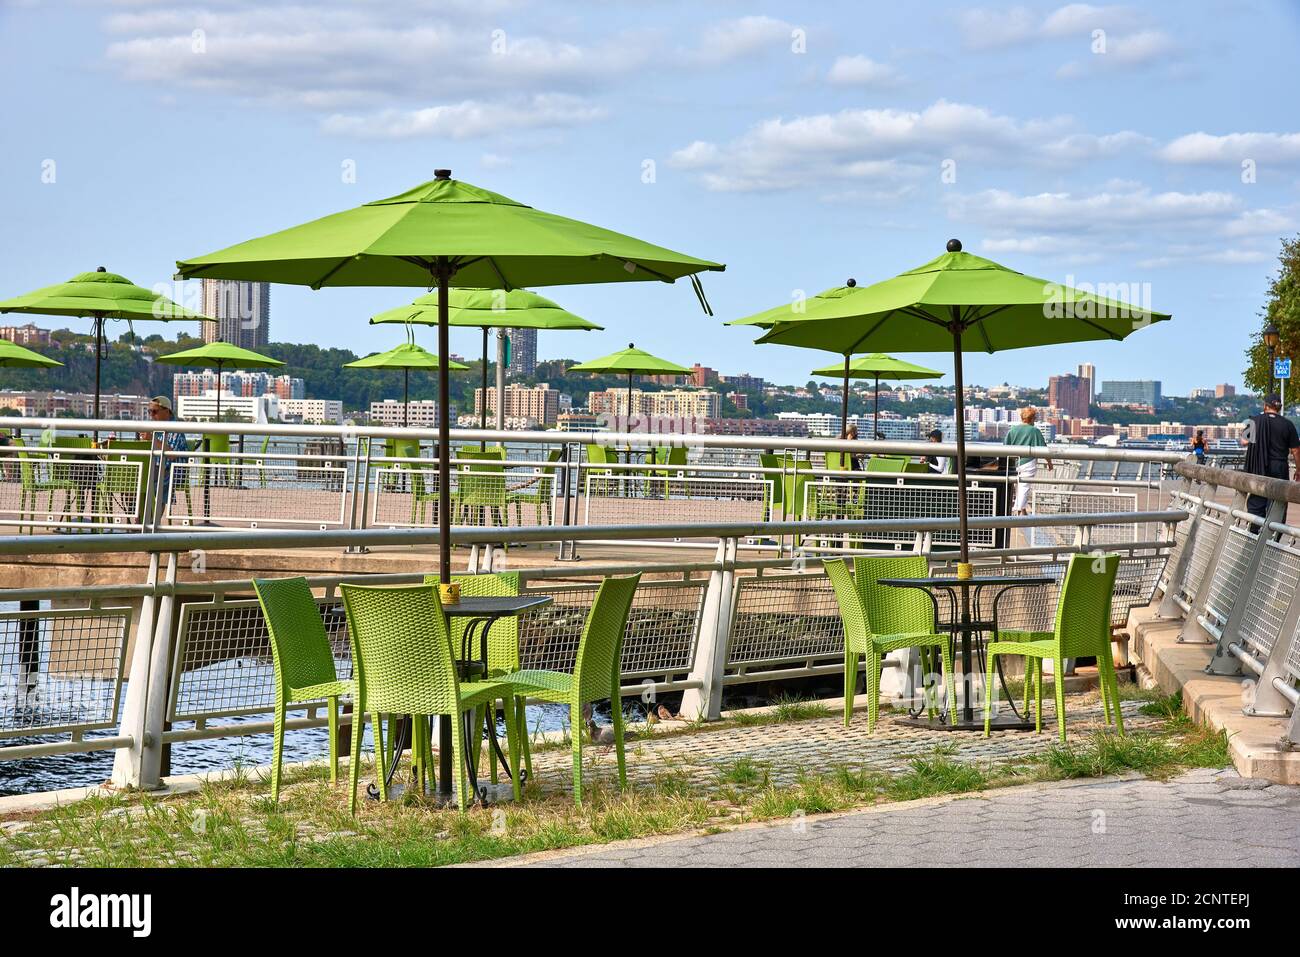 The iconic green umbrellas and chairs of the Pier i Cafe in Riverside Park on the Upper West Side of Manhattan, New York City Stock Photo